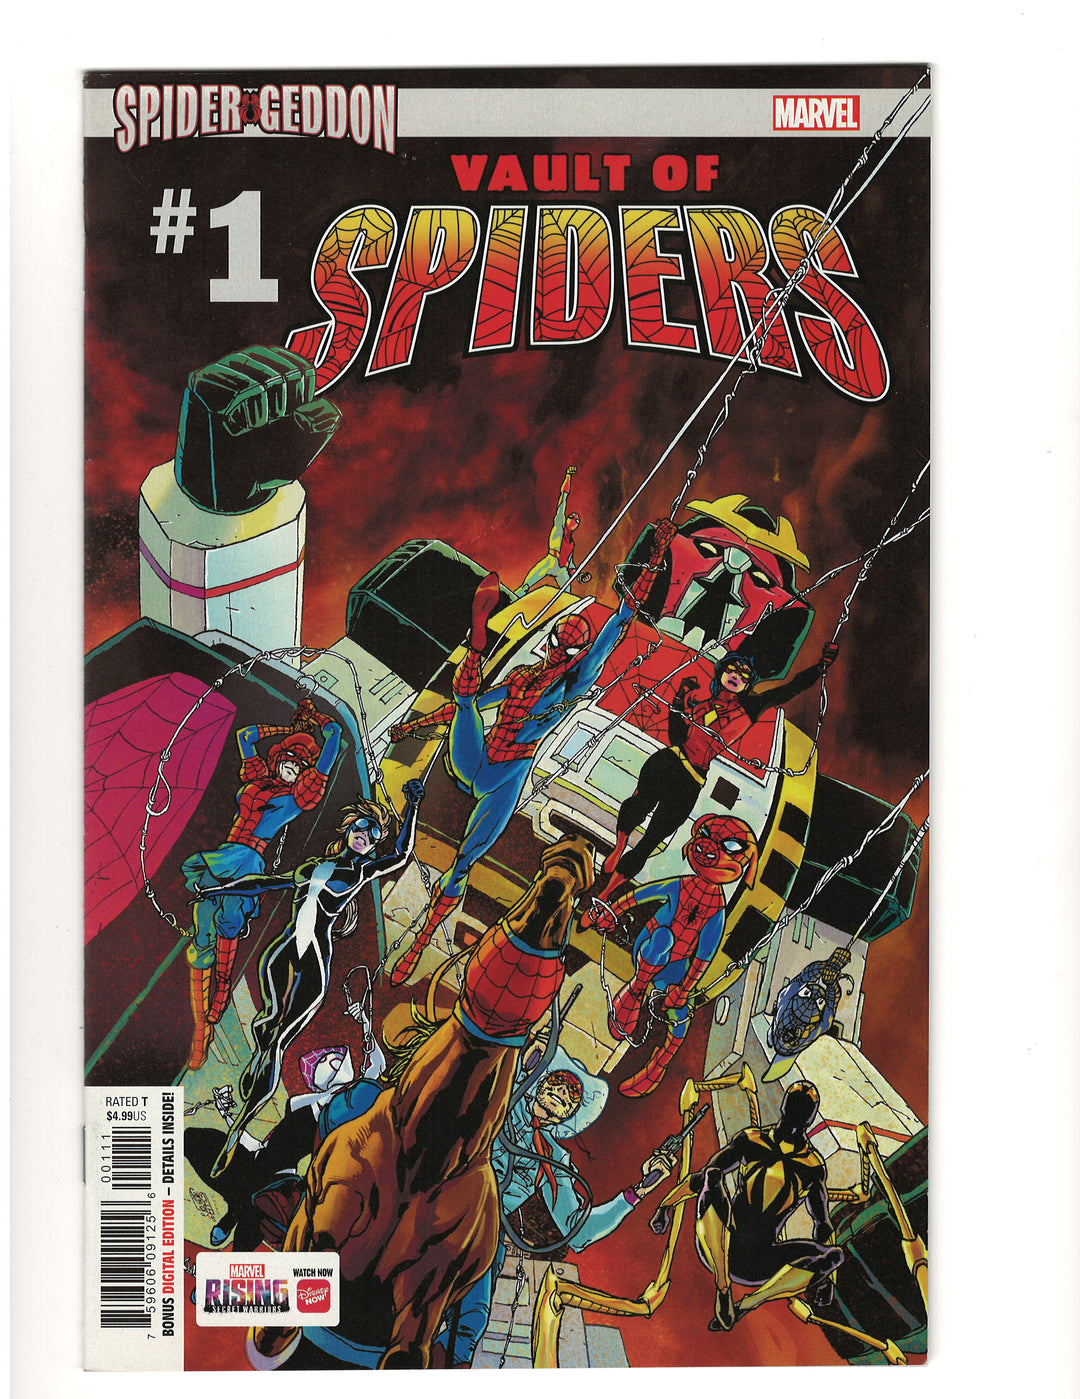 Vault Of Spiders #1 (Of 2) - 1st Appearance of Spider-Byte <OXV-02>